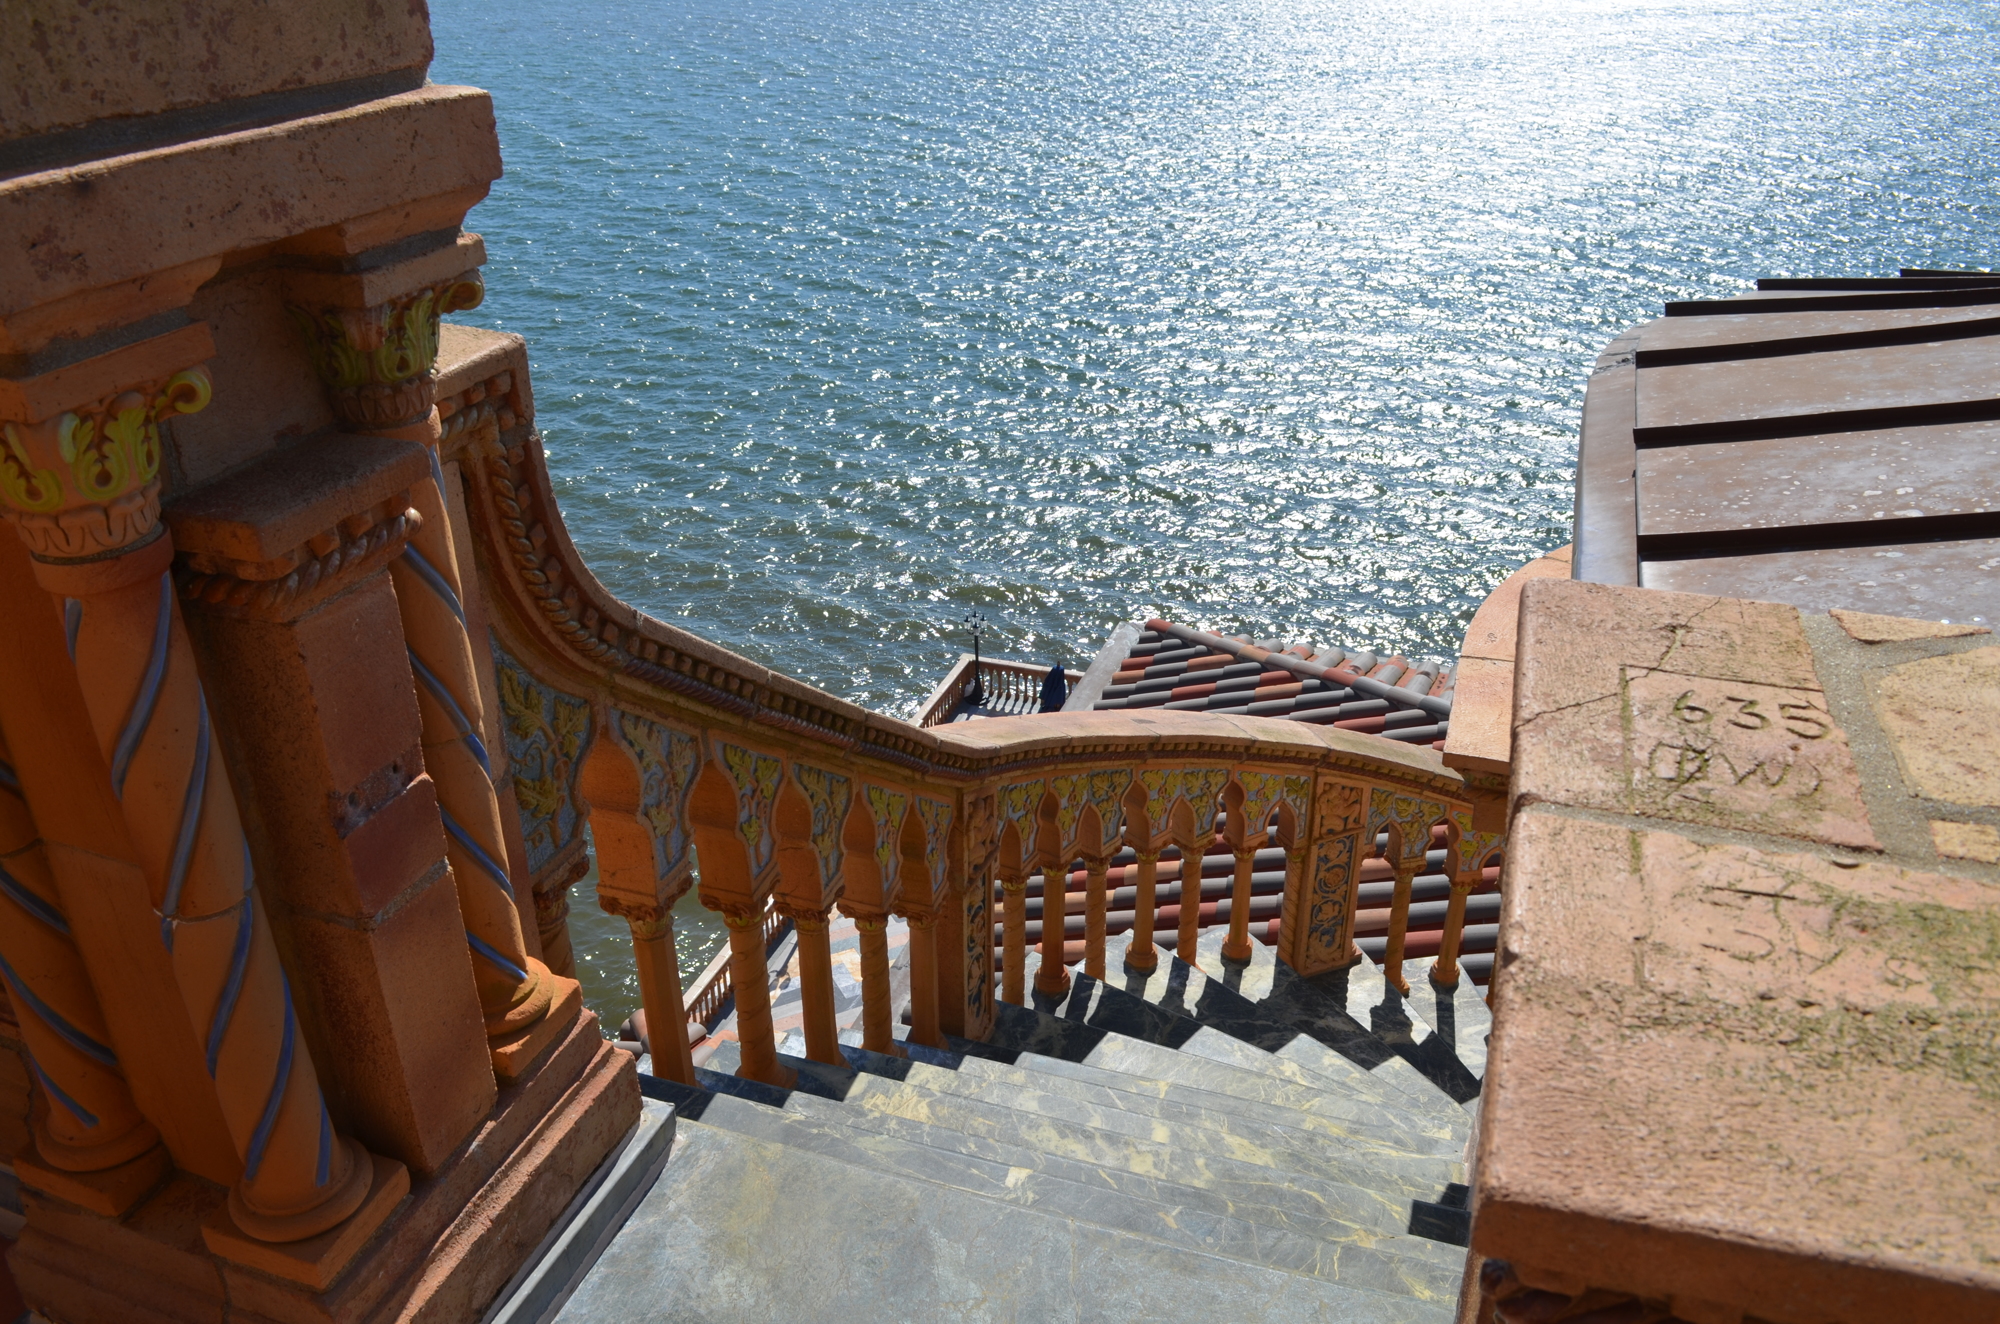 For nearly 20 years, access to the upper balcony was restricted, because the entire balustrade eroded and collapsed.